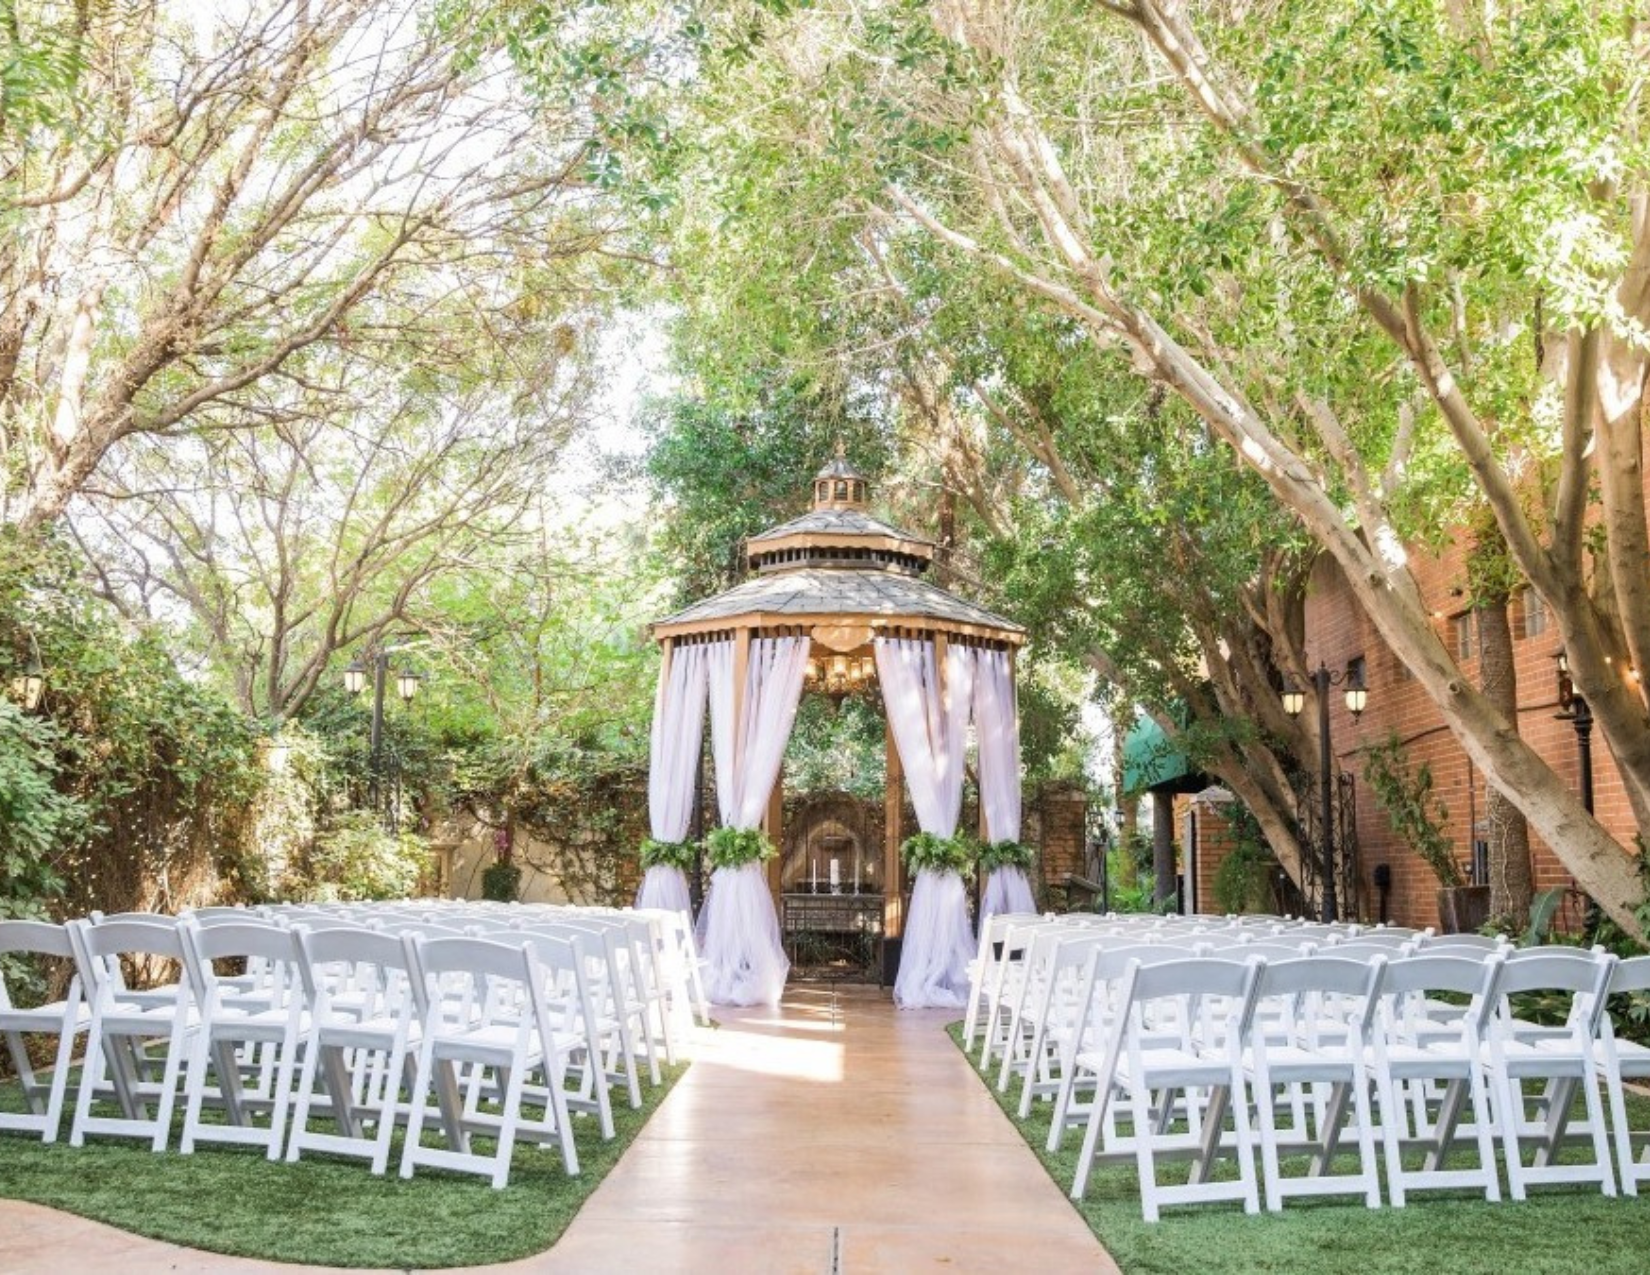 A fairytale like wedding ceremony surrounded by green grass and tall trees in Mesa, Arizona